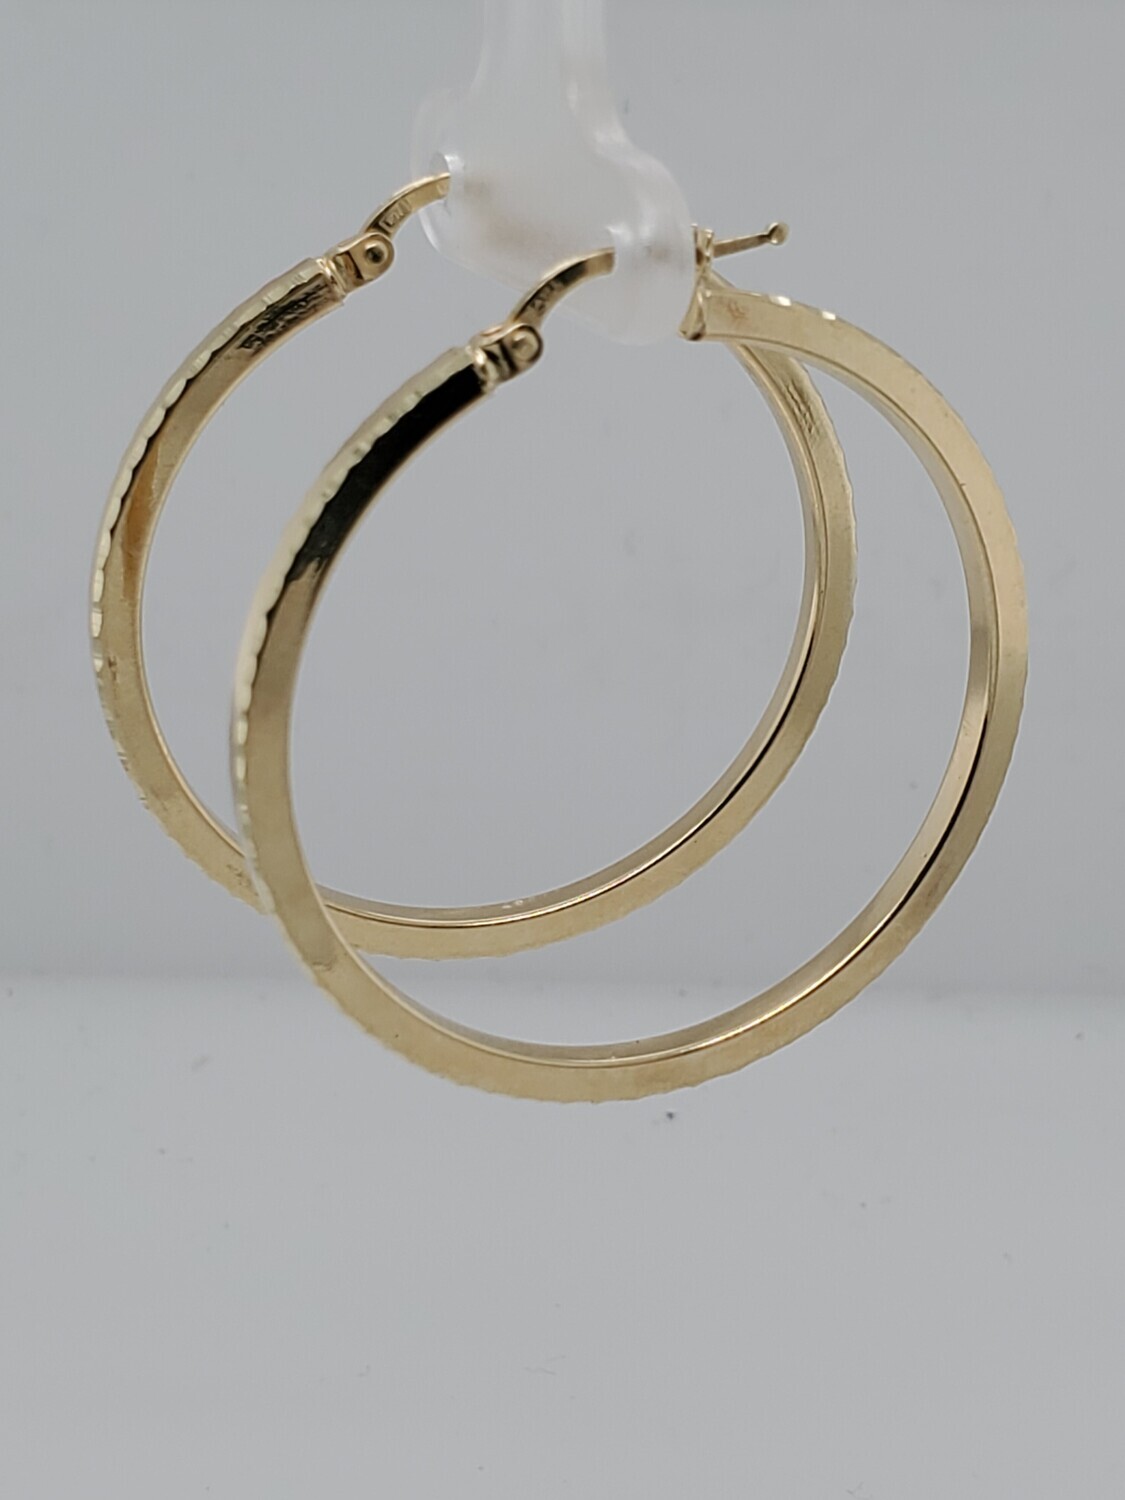 BRAND NEW!! 10k HOLLOW HOOPS WITH  DIAMOND CUT EDGE DESIGN   INVENTORY # I-18261 75TH AVE